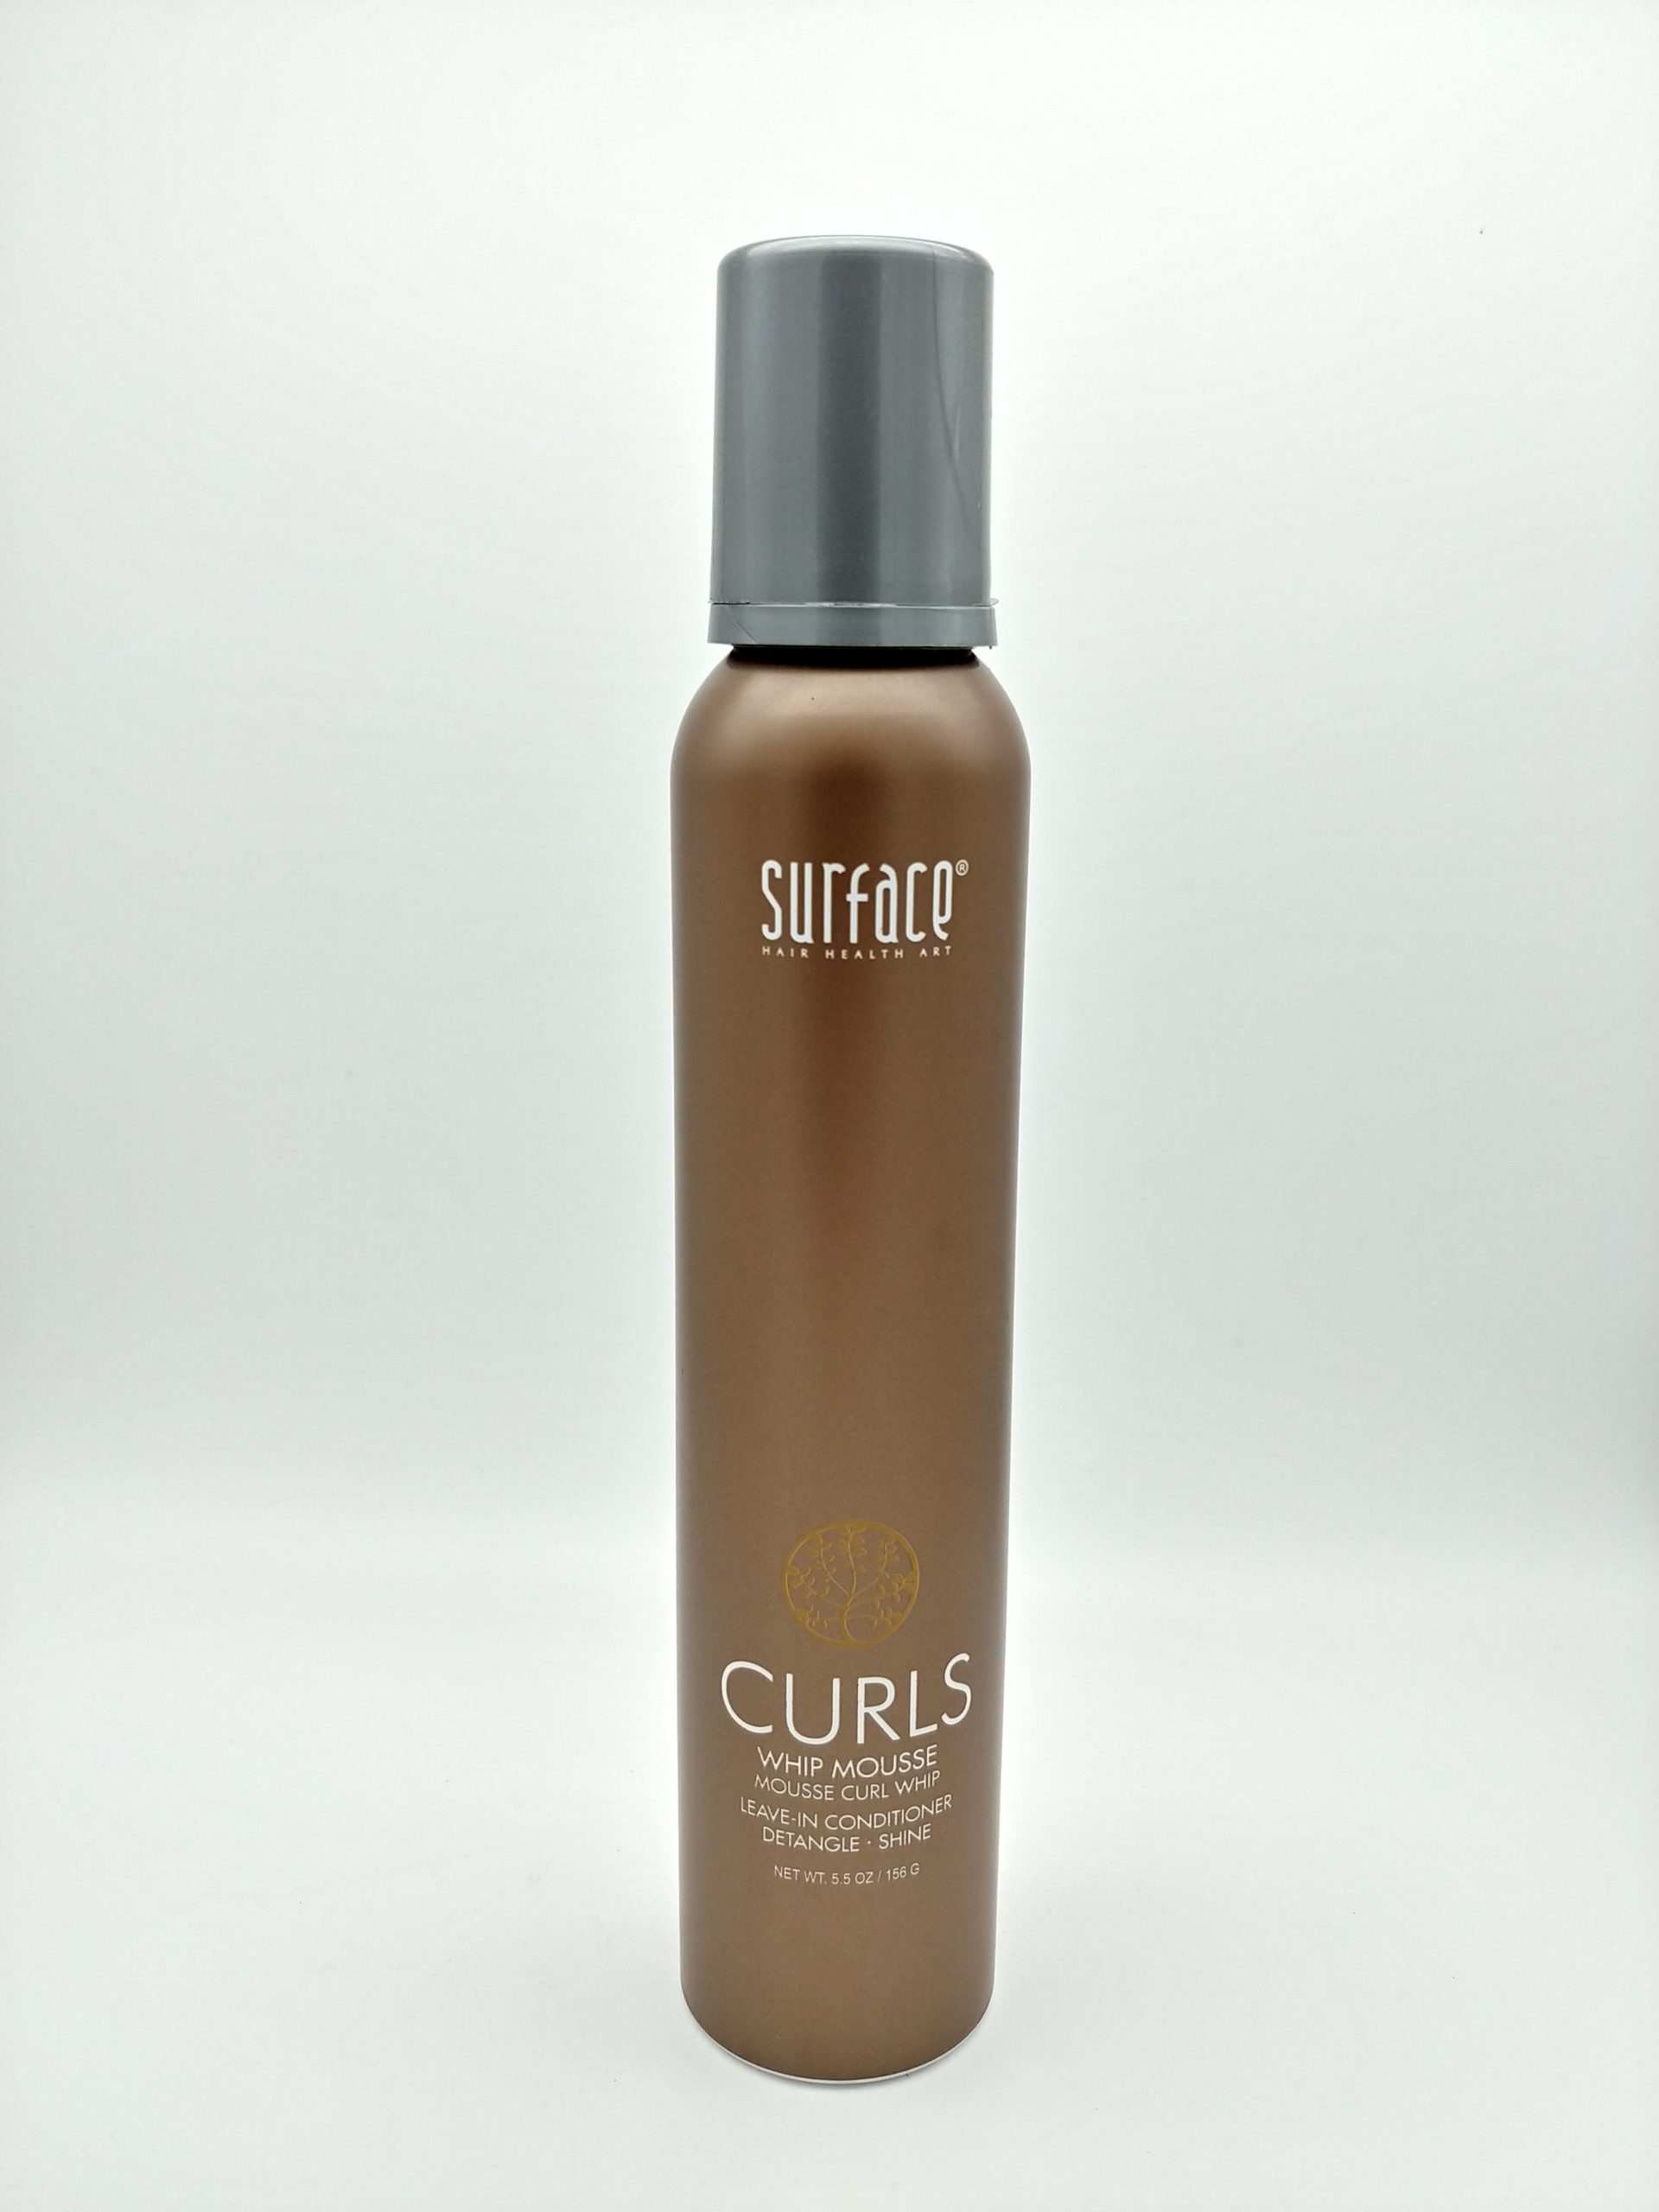 Surface Curls Whip Mousse